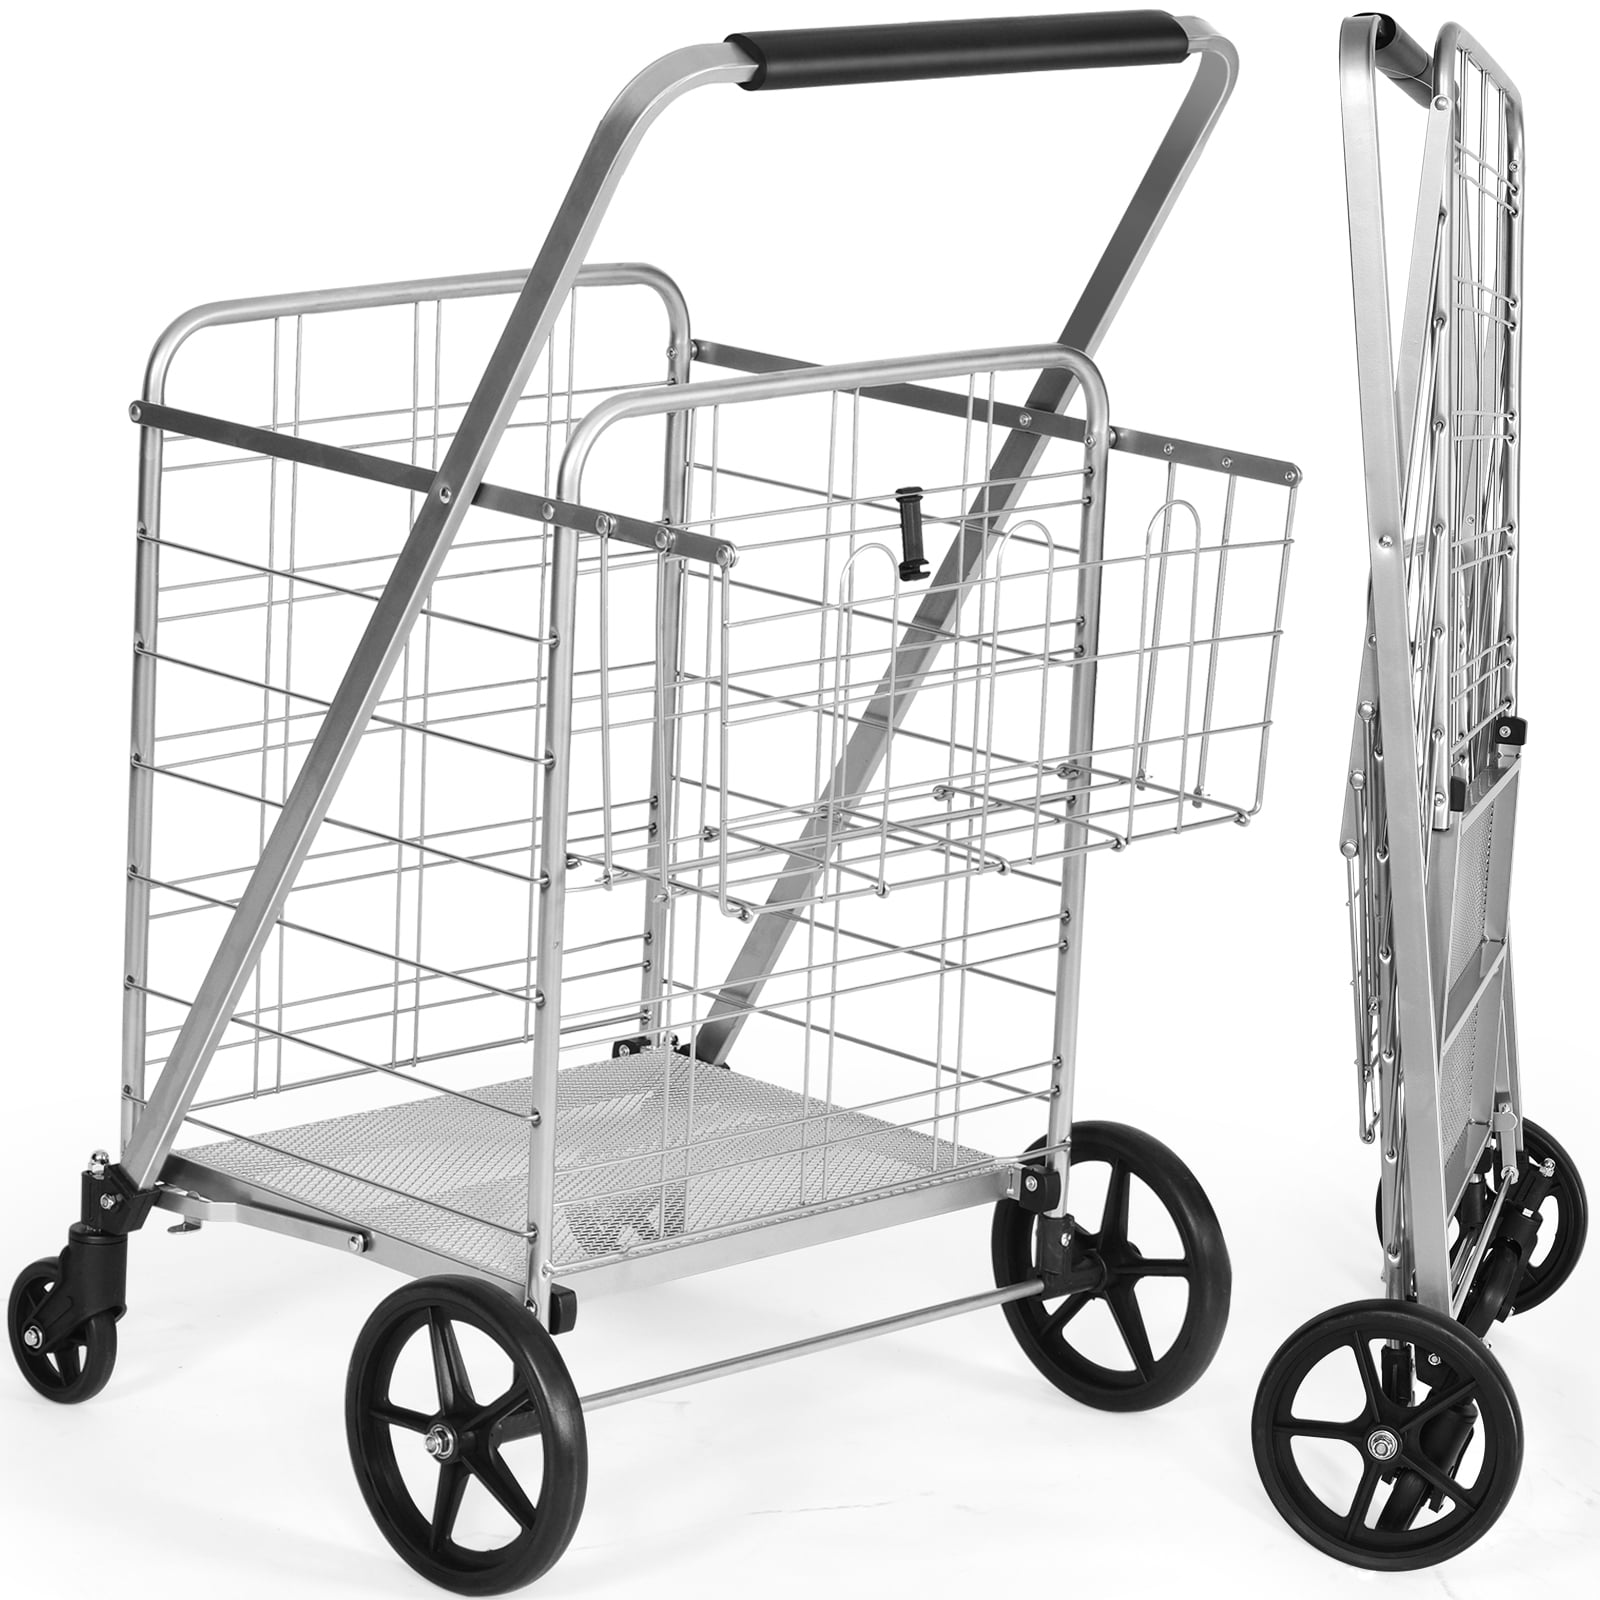 Newly Launched Medium Grocery Utility Carts with Front Swivel Wheels by AFT Pro USA,Foldable and Collapsible,Heavy Duty Loading Light Weight Trolley Easy to Put On Wheels,Package Size 38x18.5x2.5in